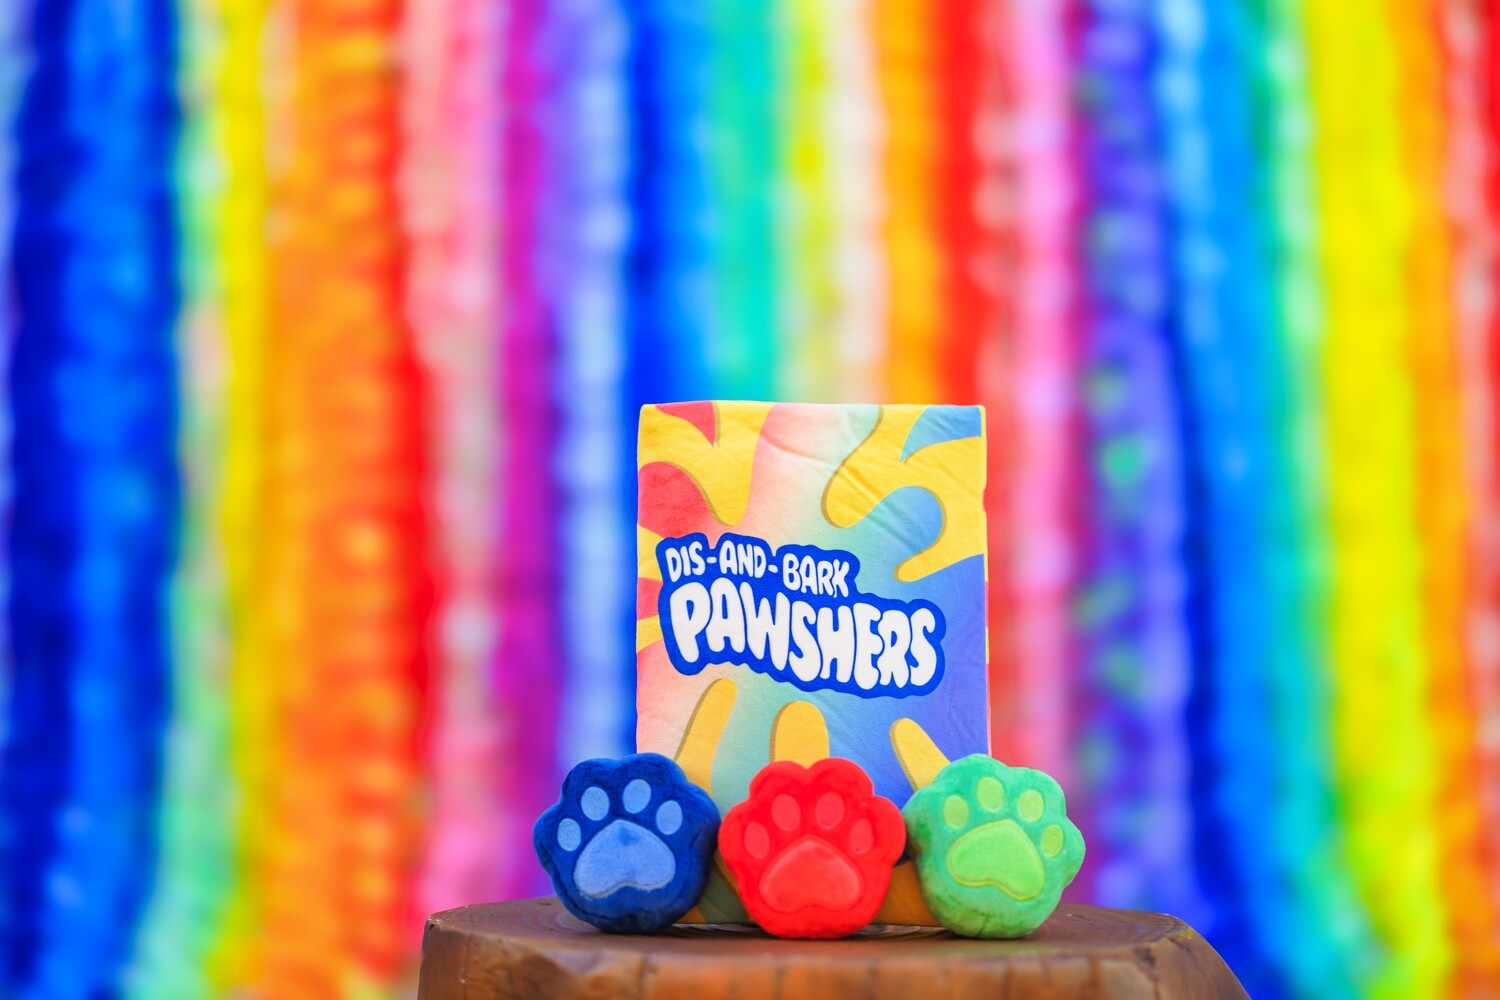 Pawshers